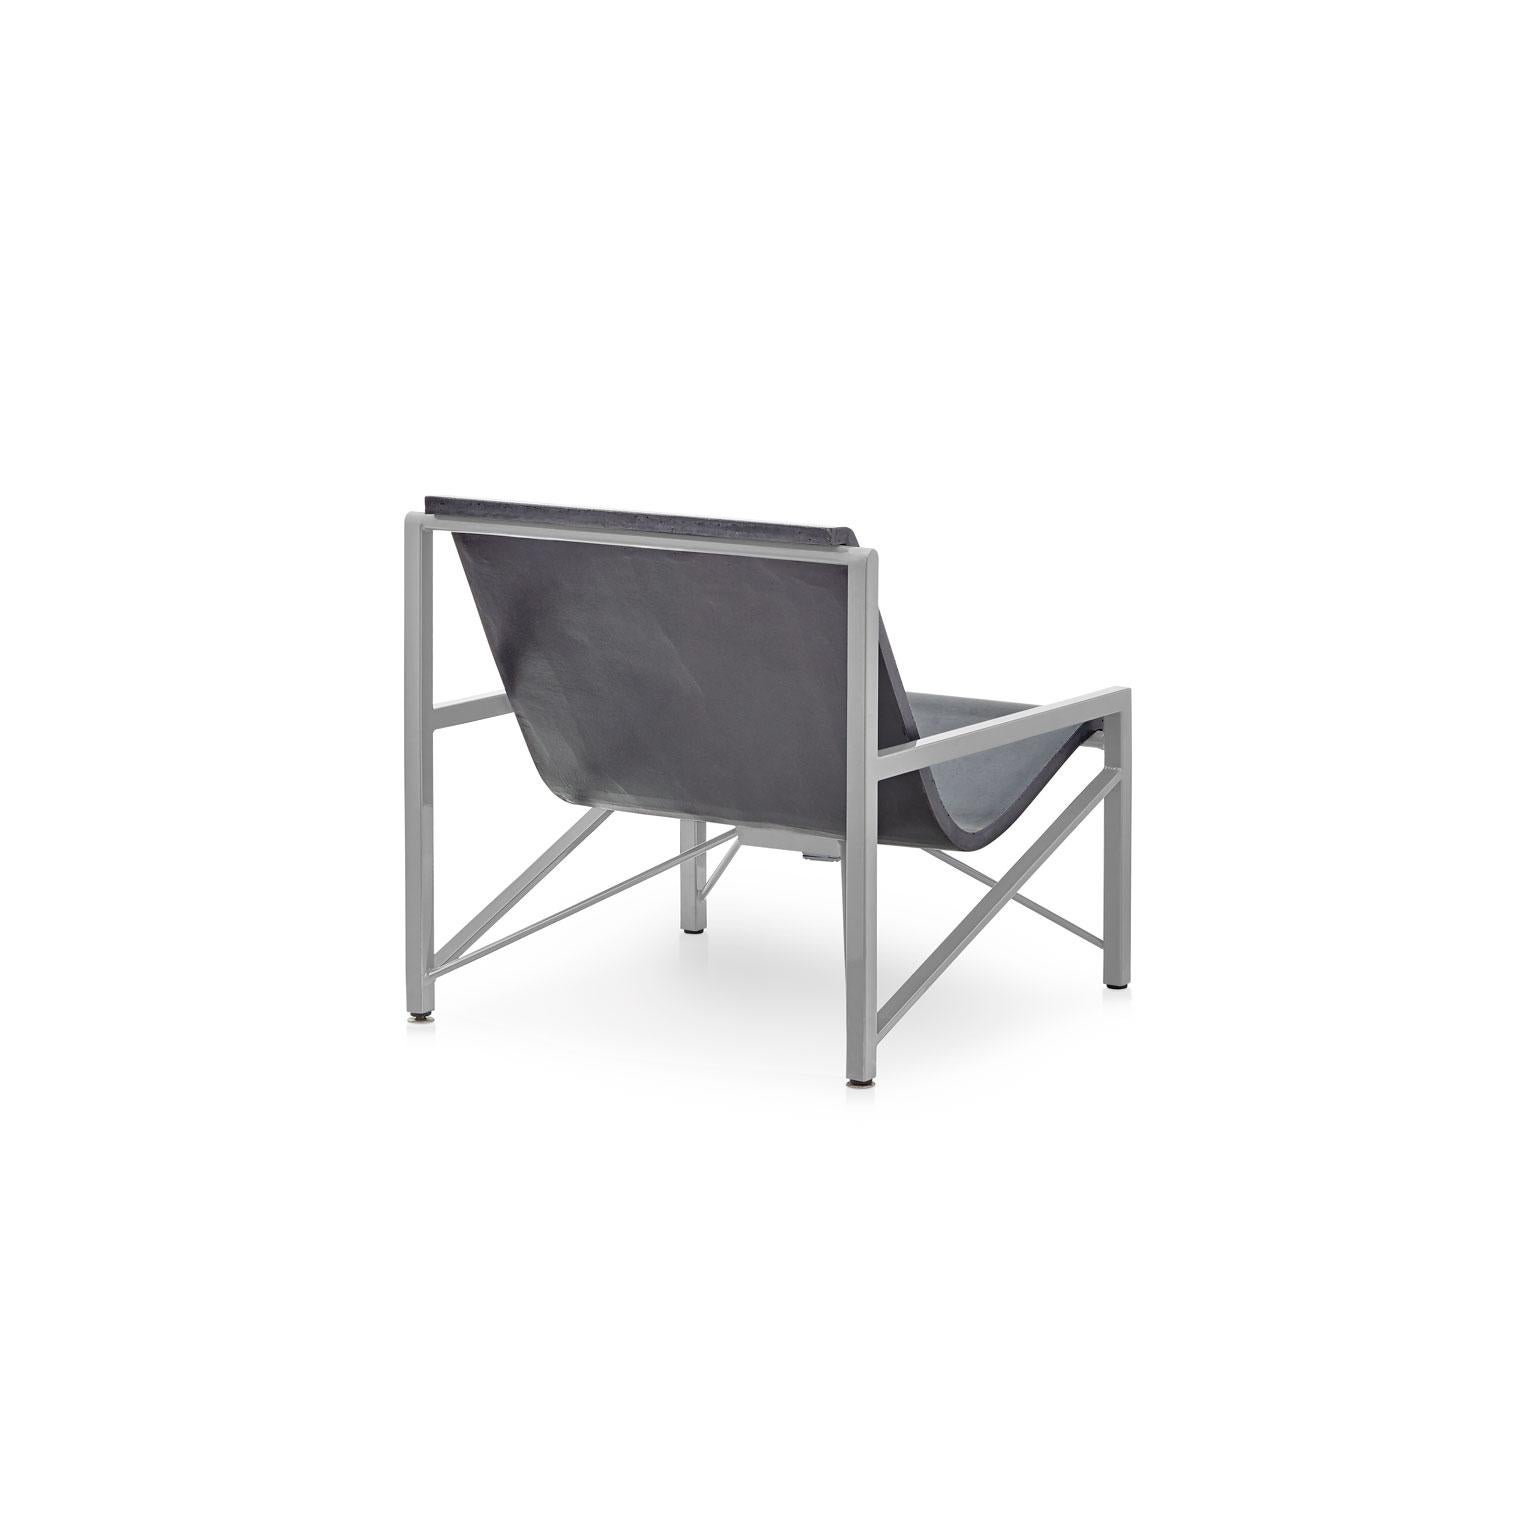 Inspired by a leather sling chair, the Evia Chair is an elegant piece of heated furniture made of cast stone and stainless steel by Galanter & Jones. Smooth like a river rock, the Helios warms your entire body with its efficient and comfortable